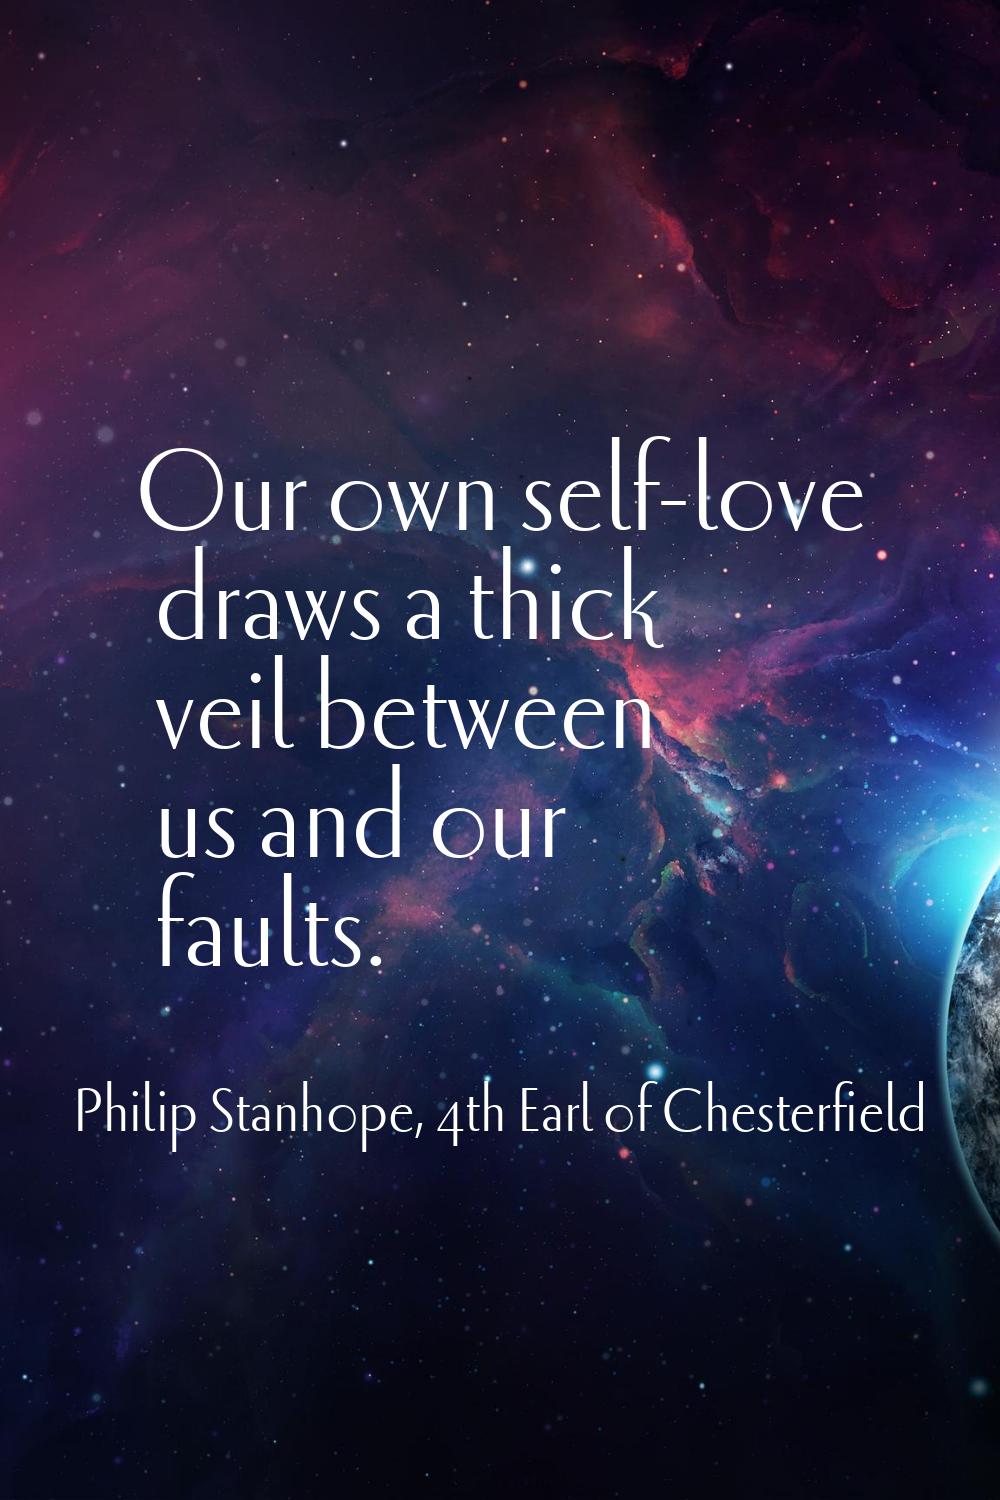 Our own self-love draws a thick veil between us and our faults.